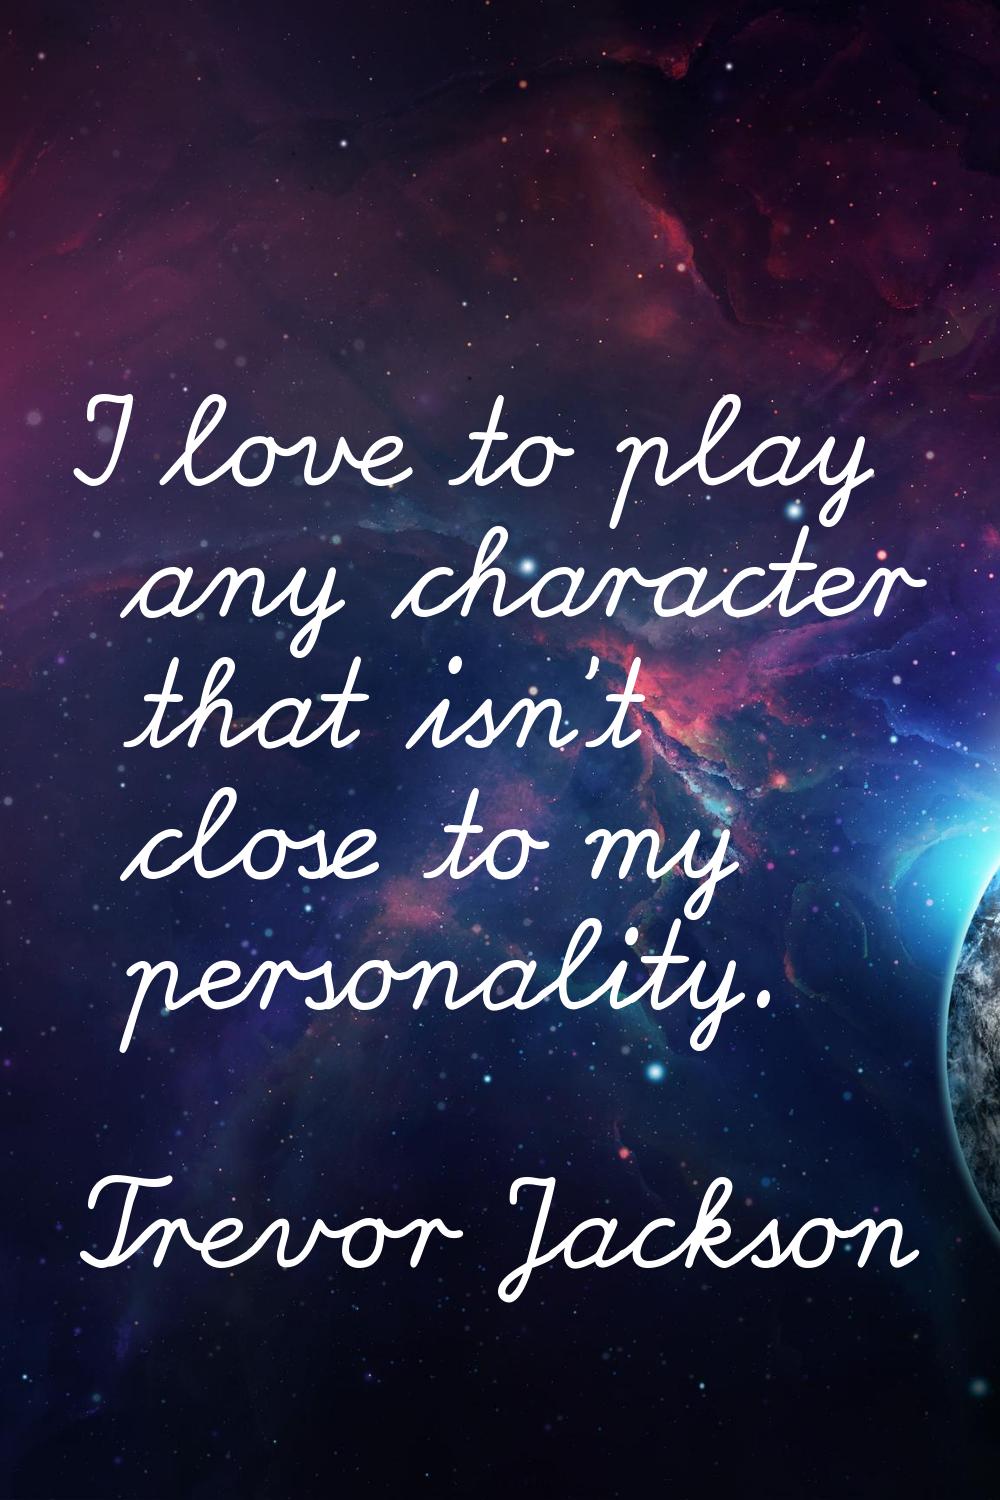 I love to play any character that isn't close to my personality.